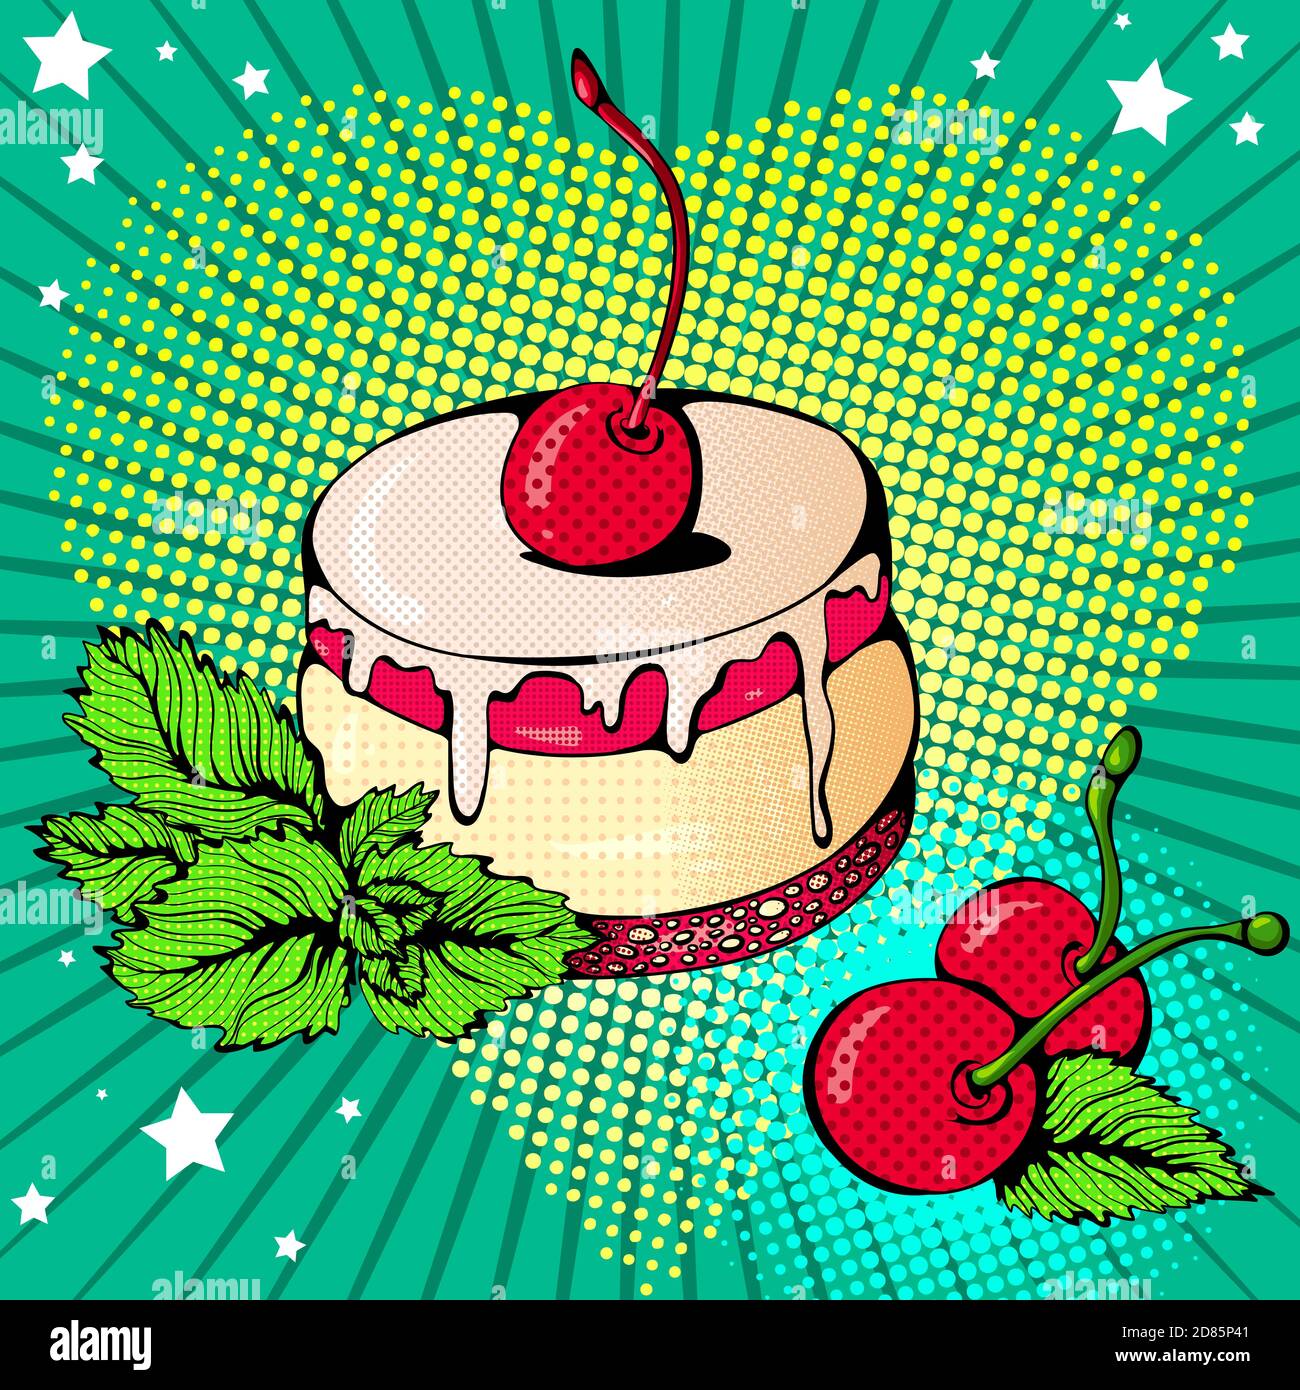 Vector bright colored background in Pop Art style. Illustration with cherry dessert. Retro comic style Stock Vector